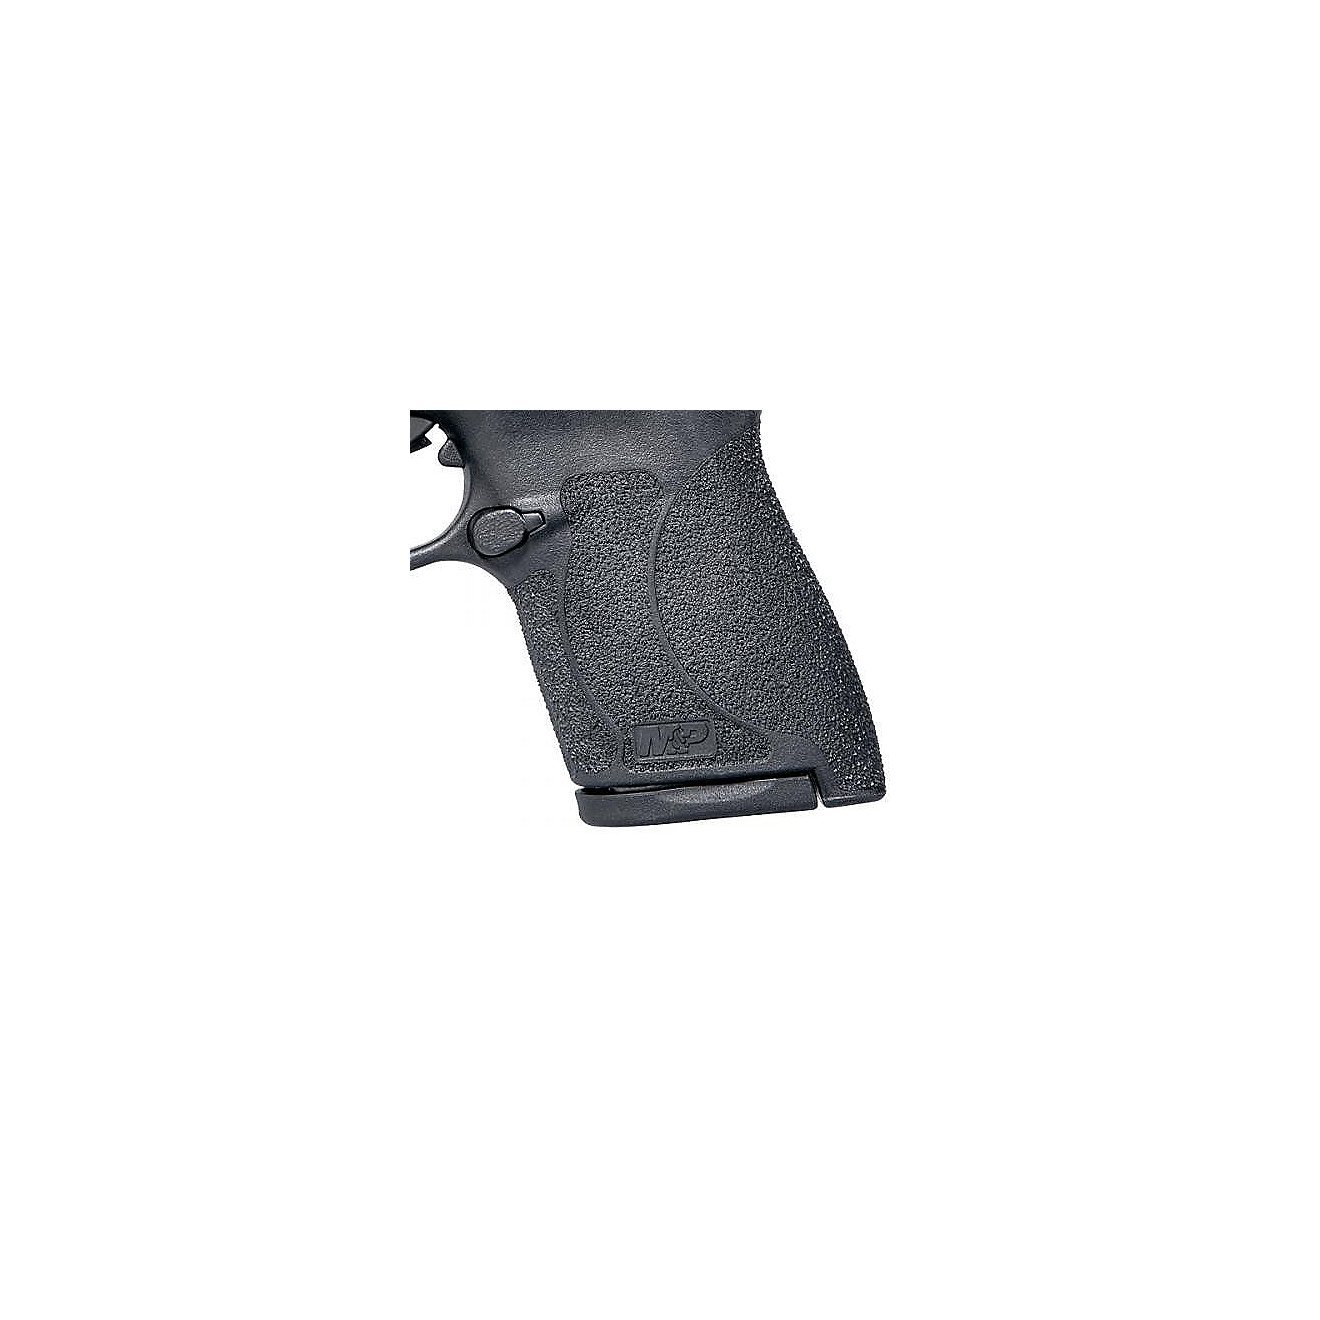 Smith & Wesson M&P40 ShieldM2.0 40 S&W Compact 7-Round Pistol                                                                    - view number 8